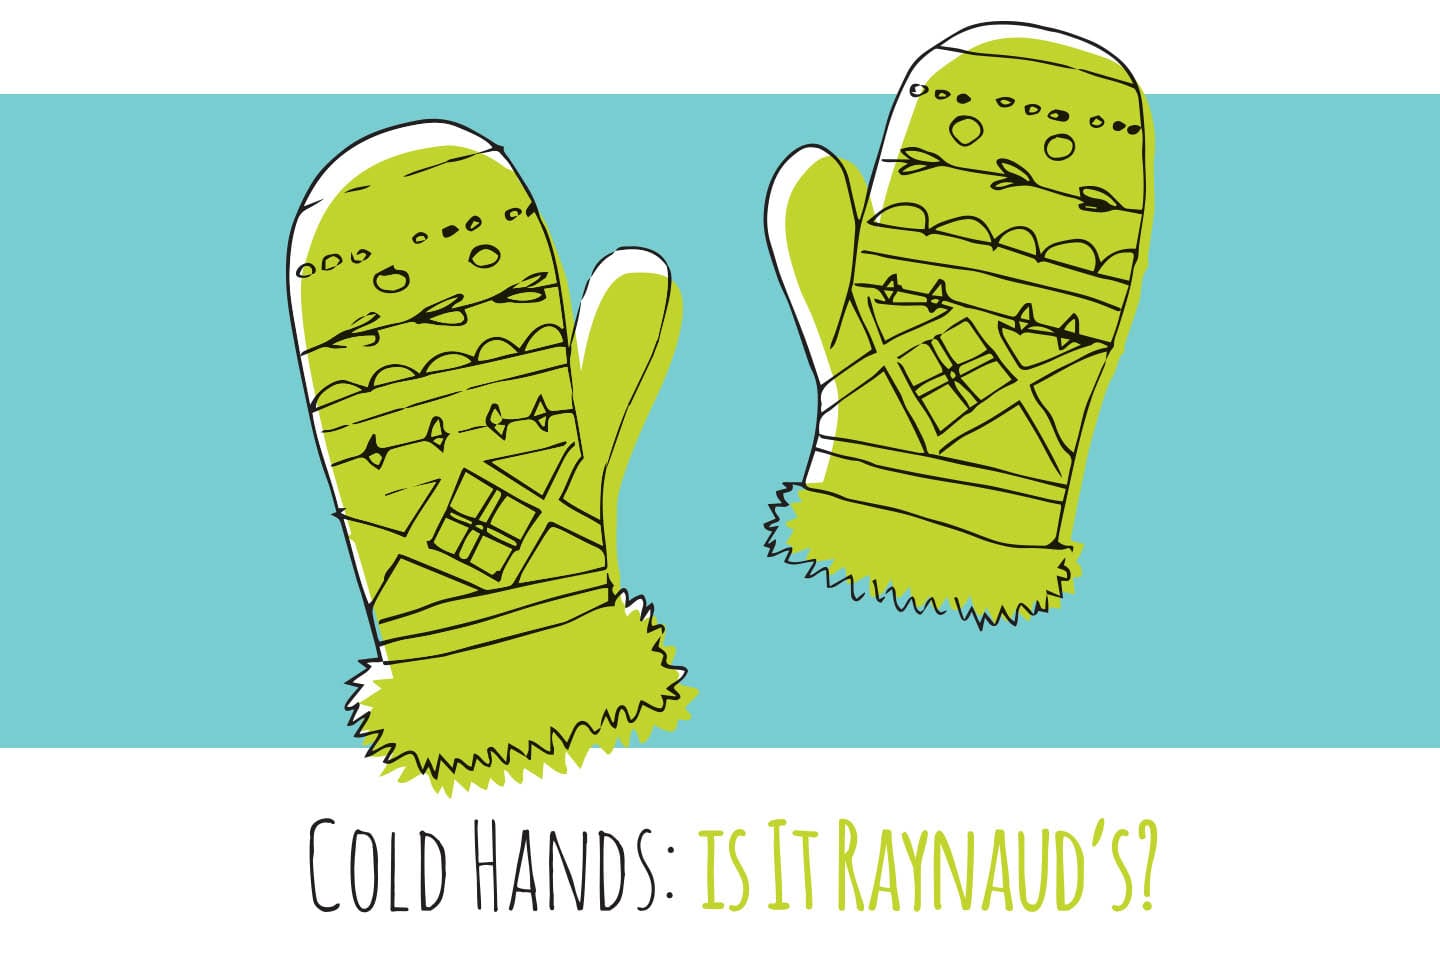 Cold Hands: Is It Raynaud’s? mitten illustration chattanooga